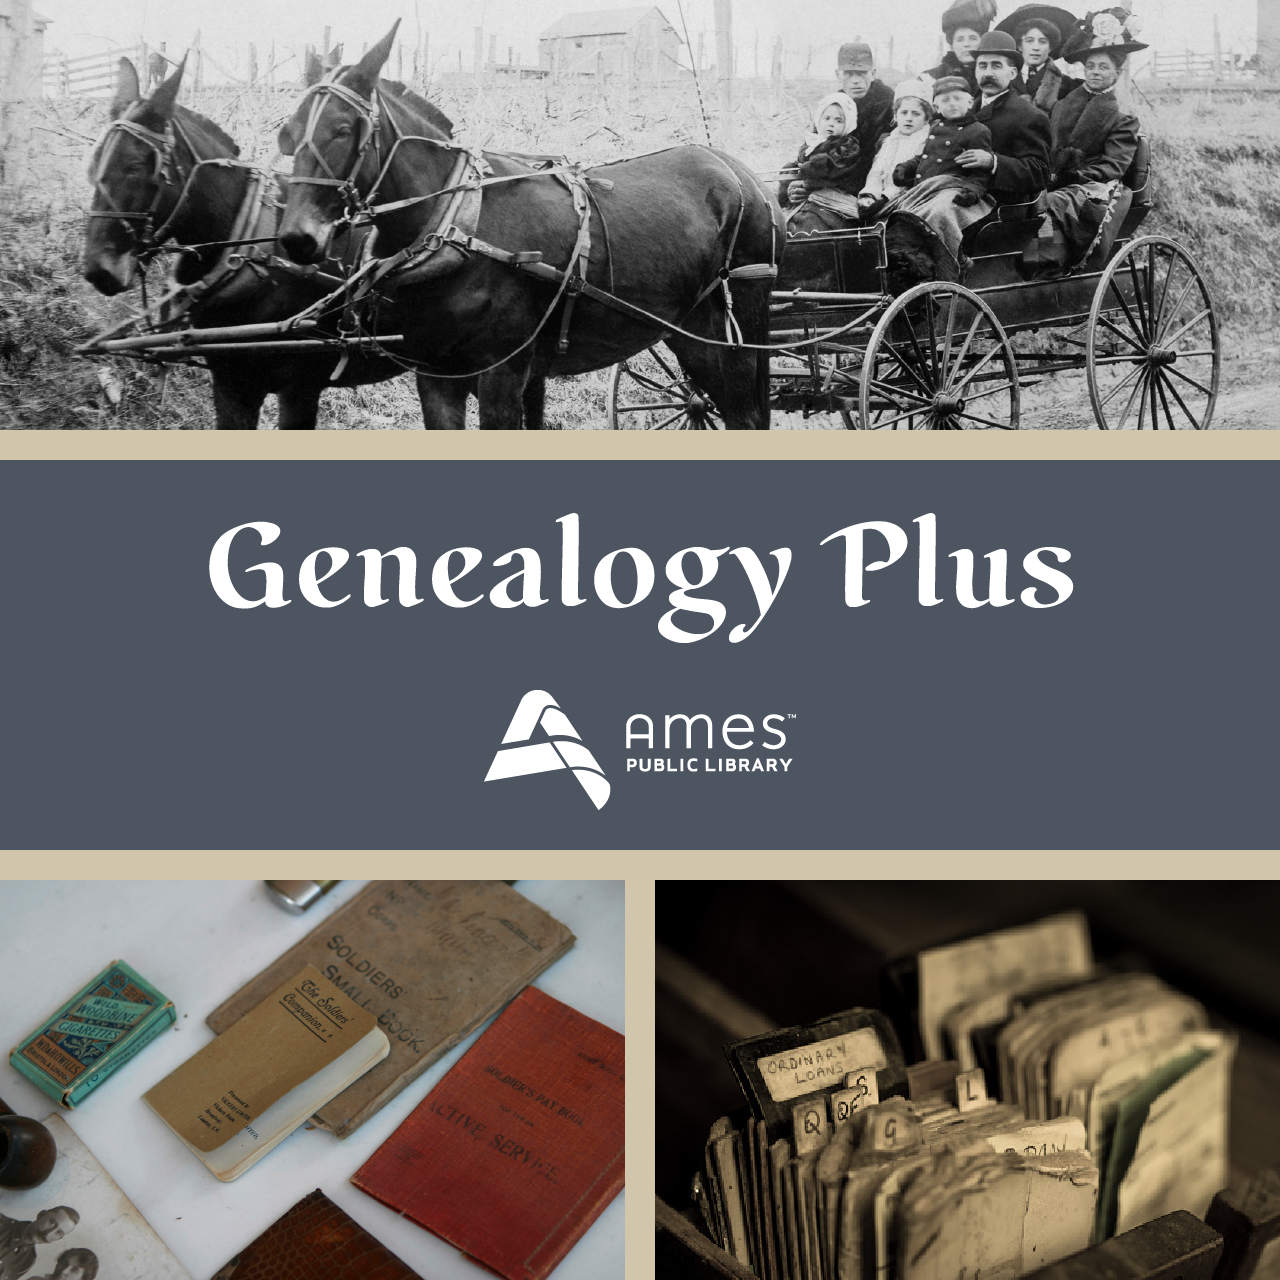 Genealogy Plus graphic with historical photos of family in a carriage, journals, and records